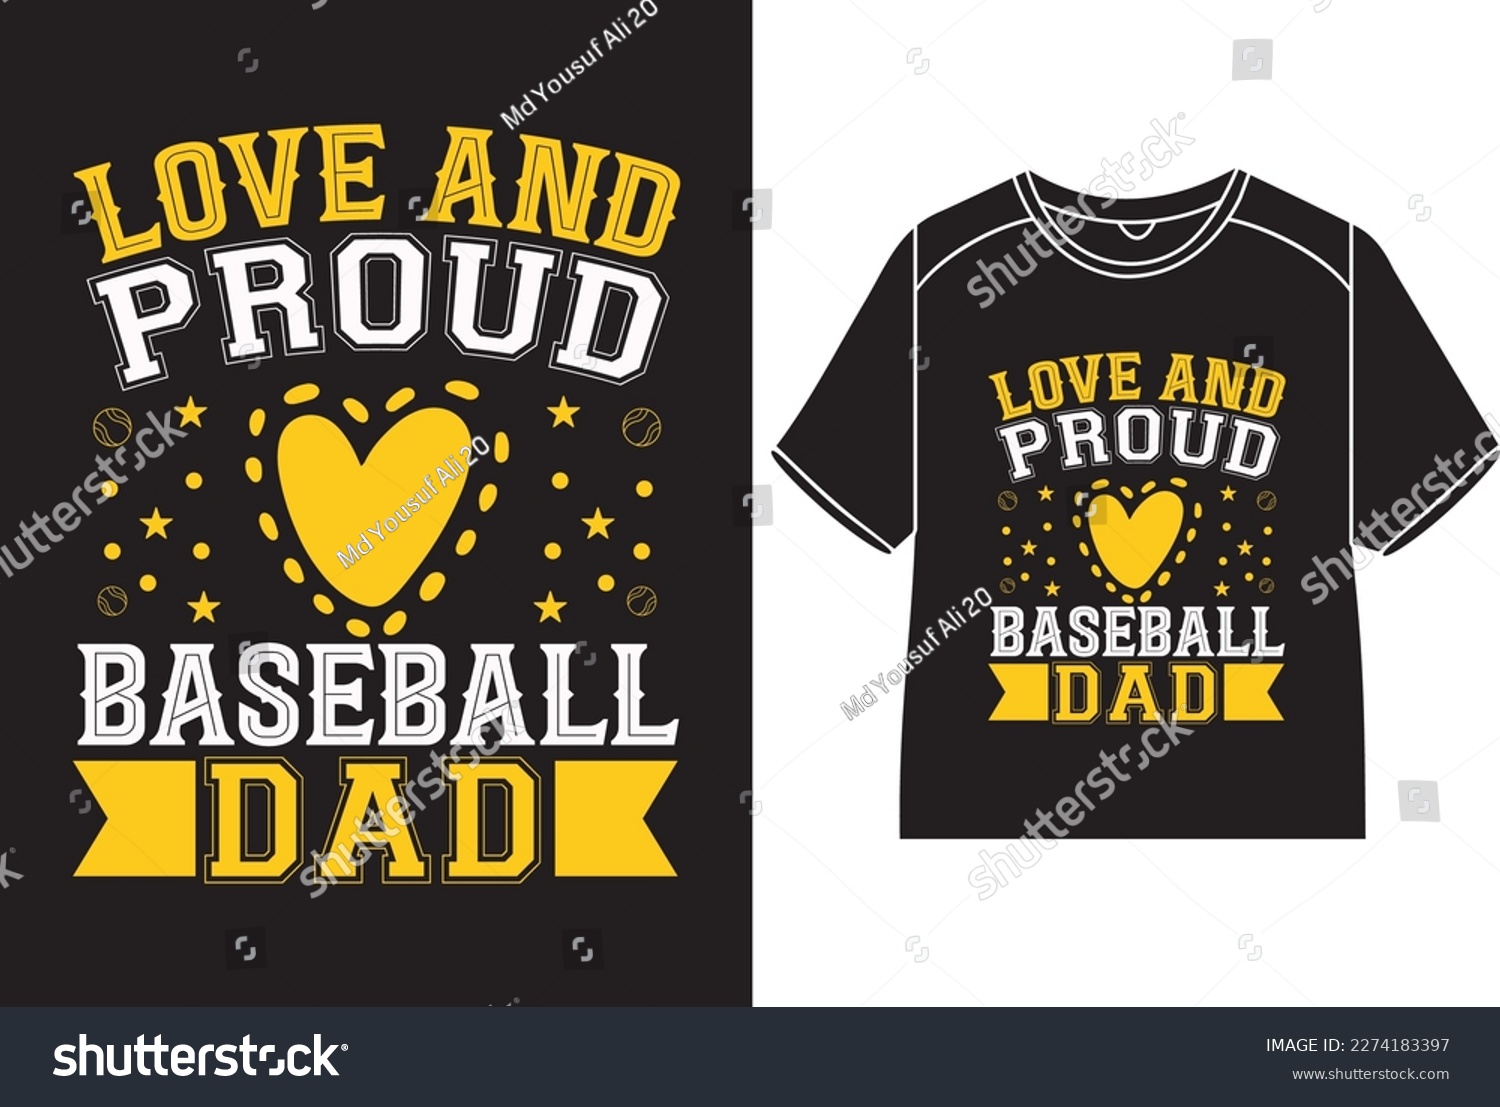 SVG of Love and proud baseball dad T-Shirt Design svg